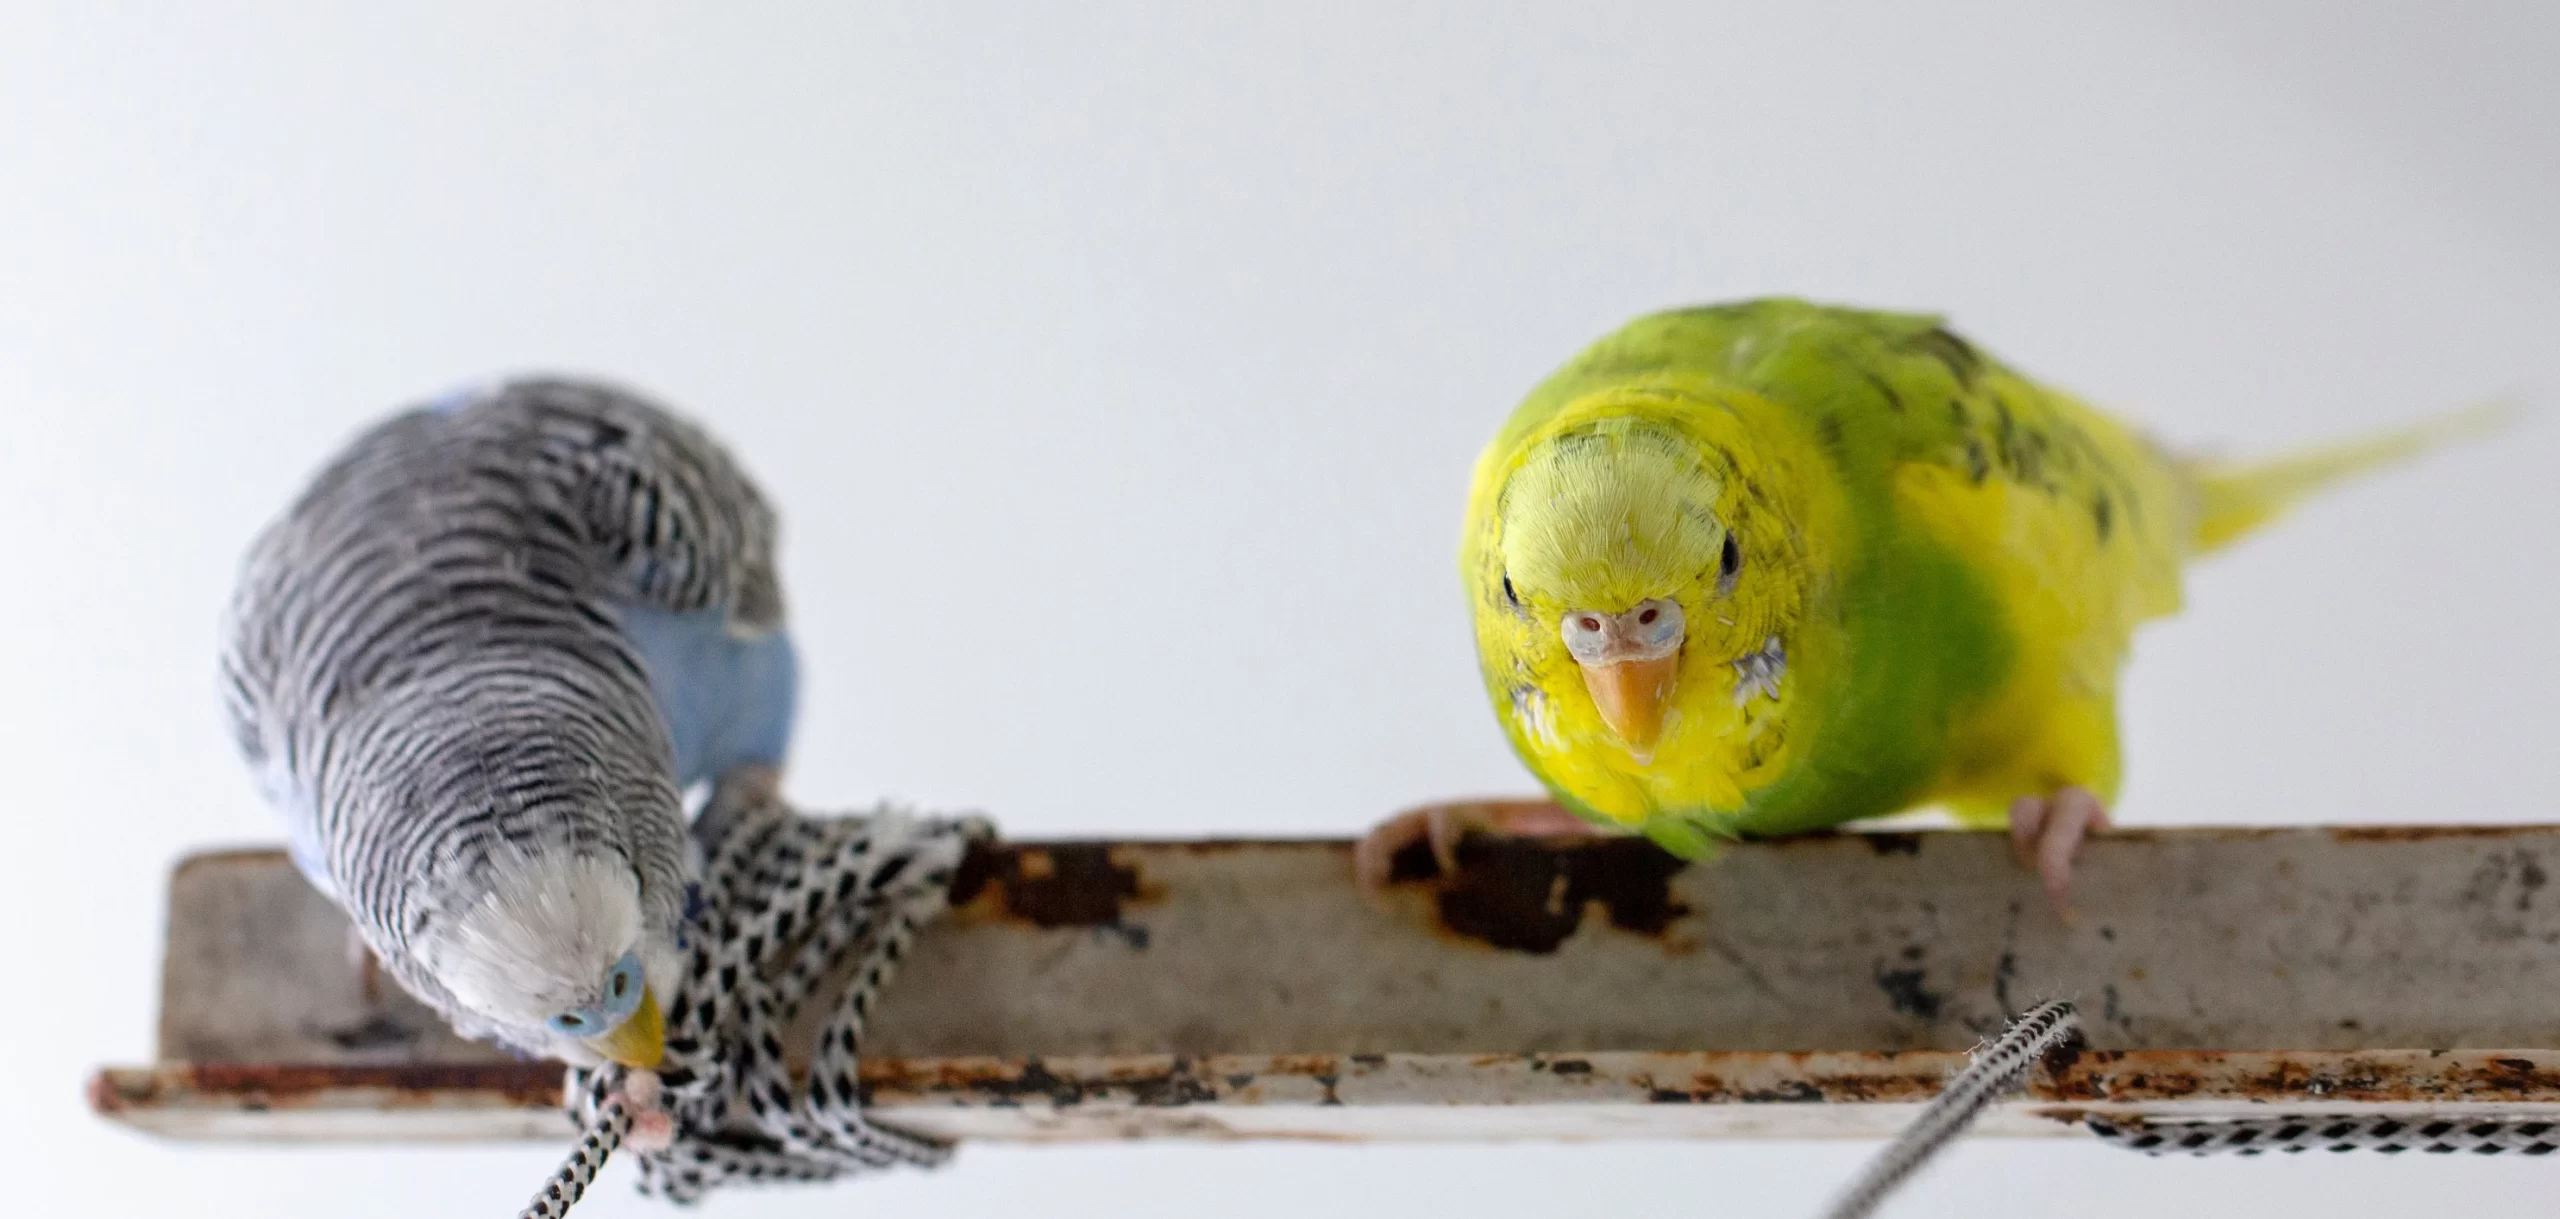 <p>Budgies are small, colorful birds that thrive in apartment settings. They are social creatures that enjoy interaction and can even learn to mimic speech and sounds. Providing them with a reasonably sized cage and regular engagement will keep them happy and chirpy, adding vibrancy to any small living space.</p>